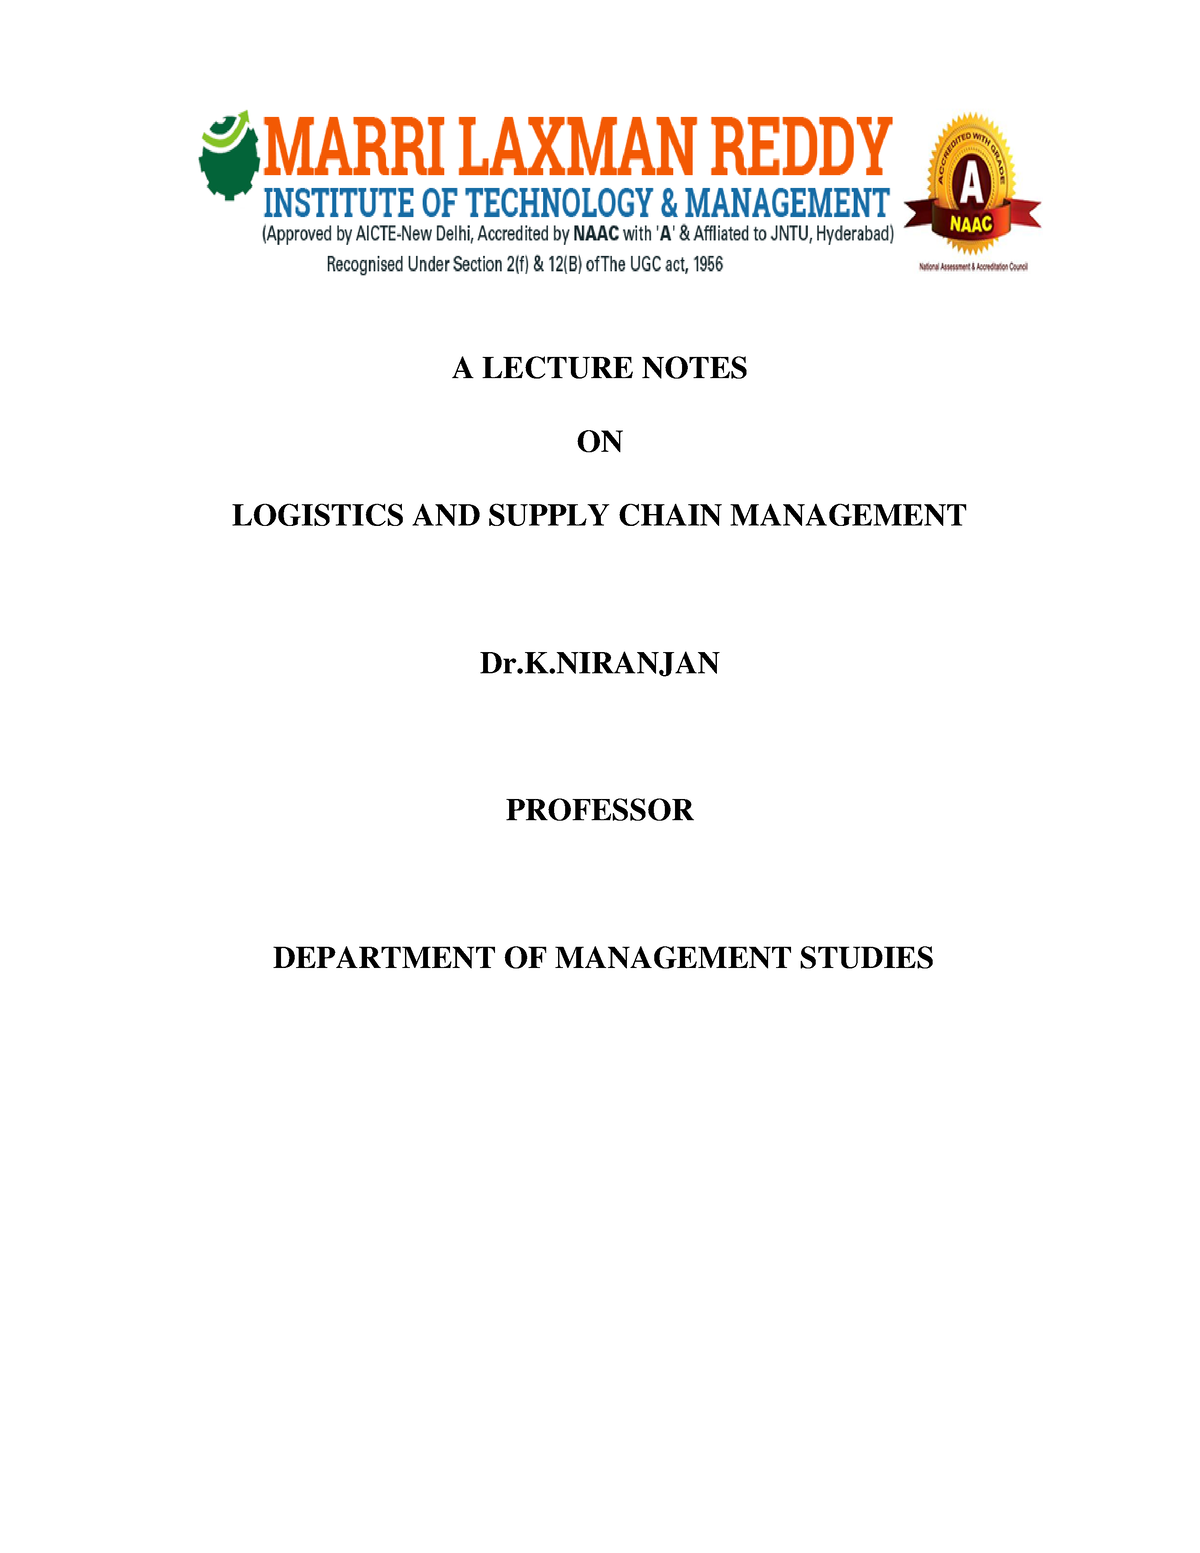 research papers on logistics management